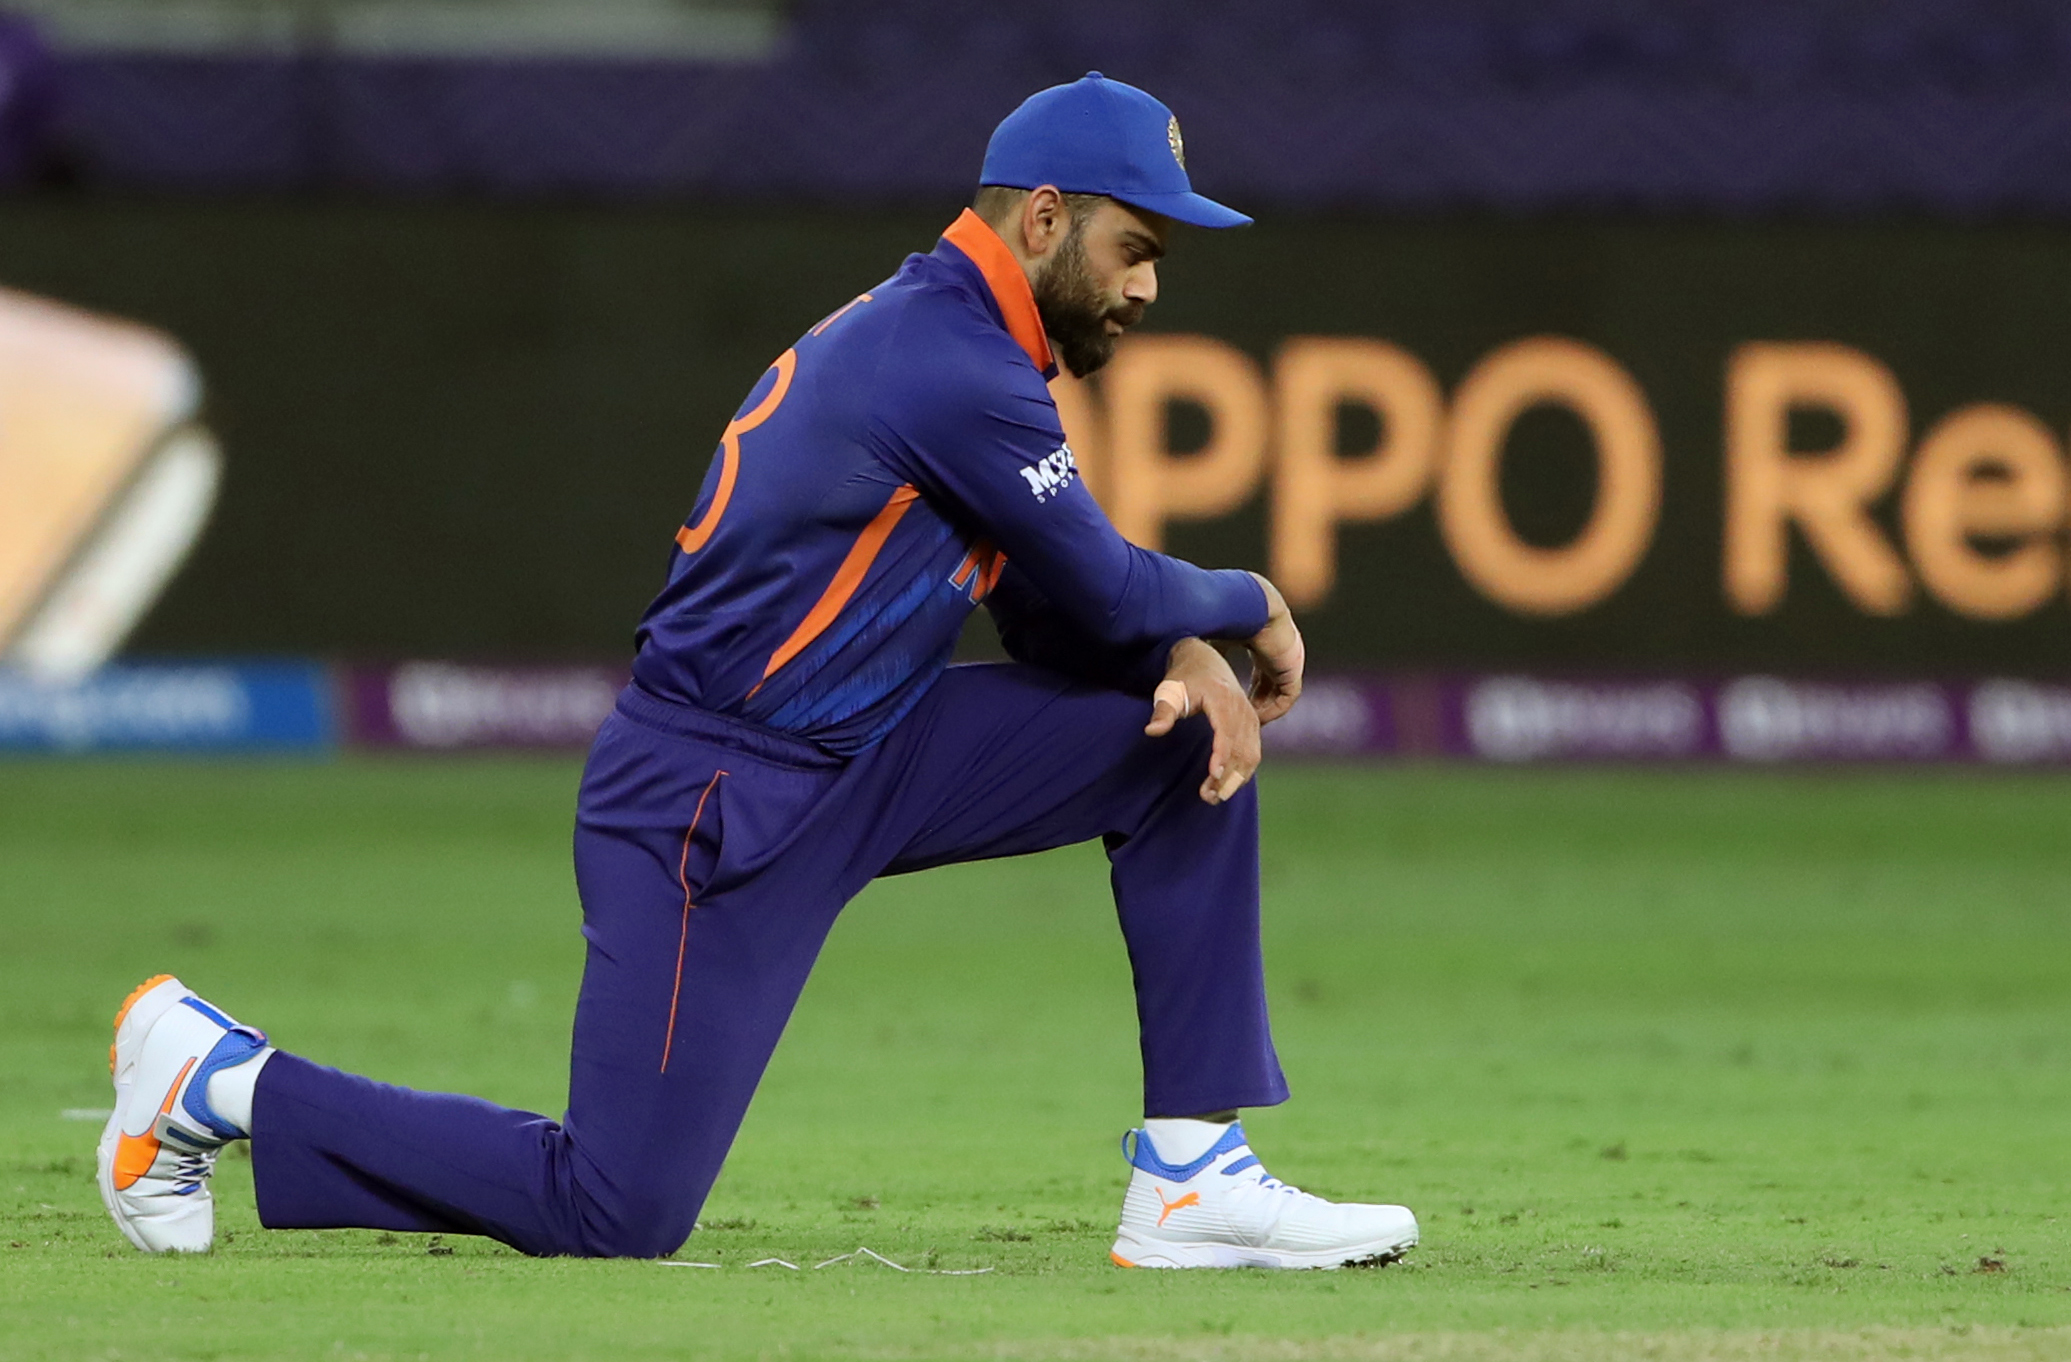 Is it right time for Virat Kohli to bow out of captaincy of white-ball team?